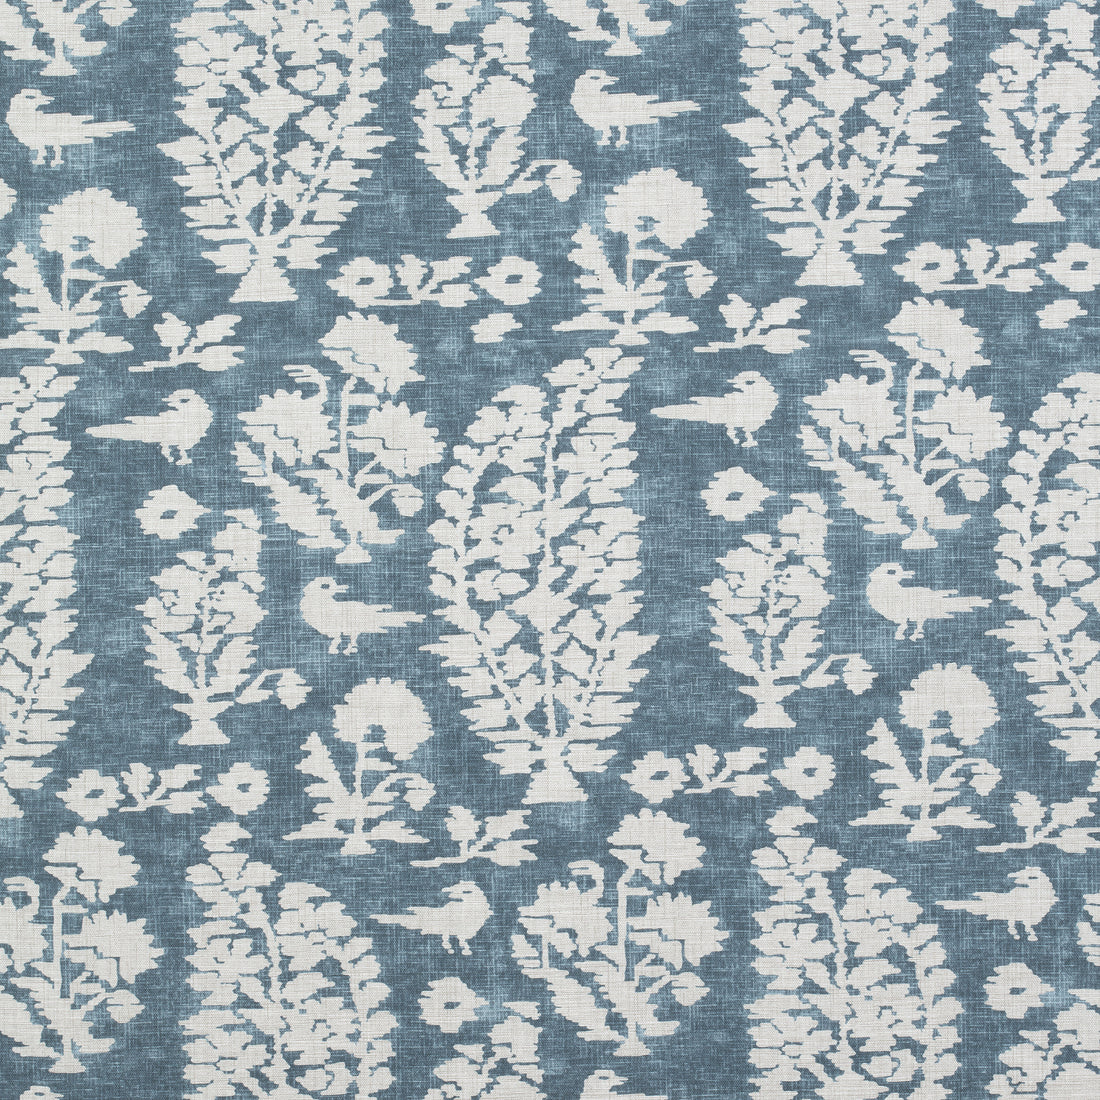 Allaire fabric in slate blue color - pattern number F972594 - by Thibaut in the Chestnut Hill collection